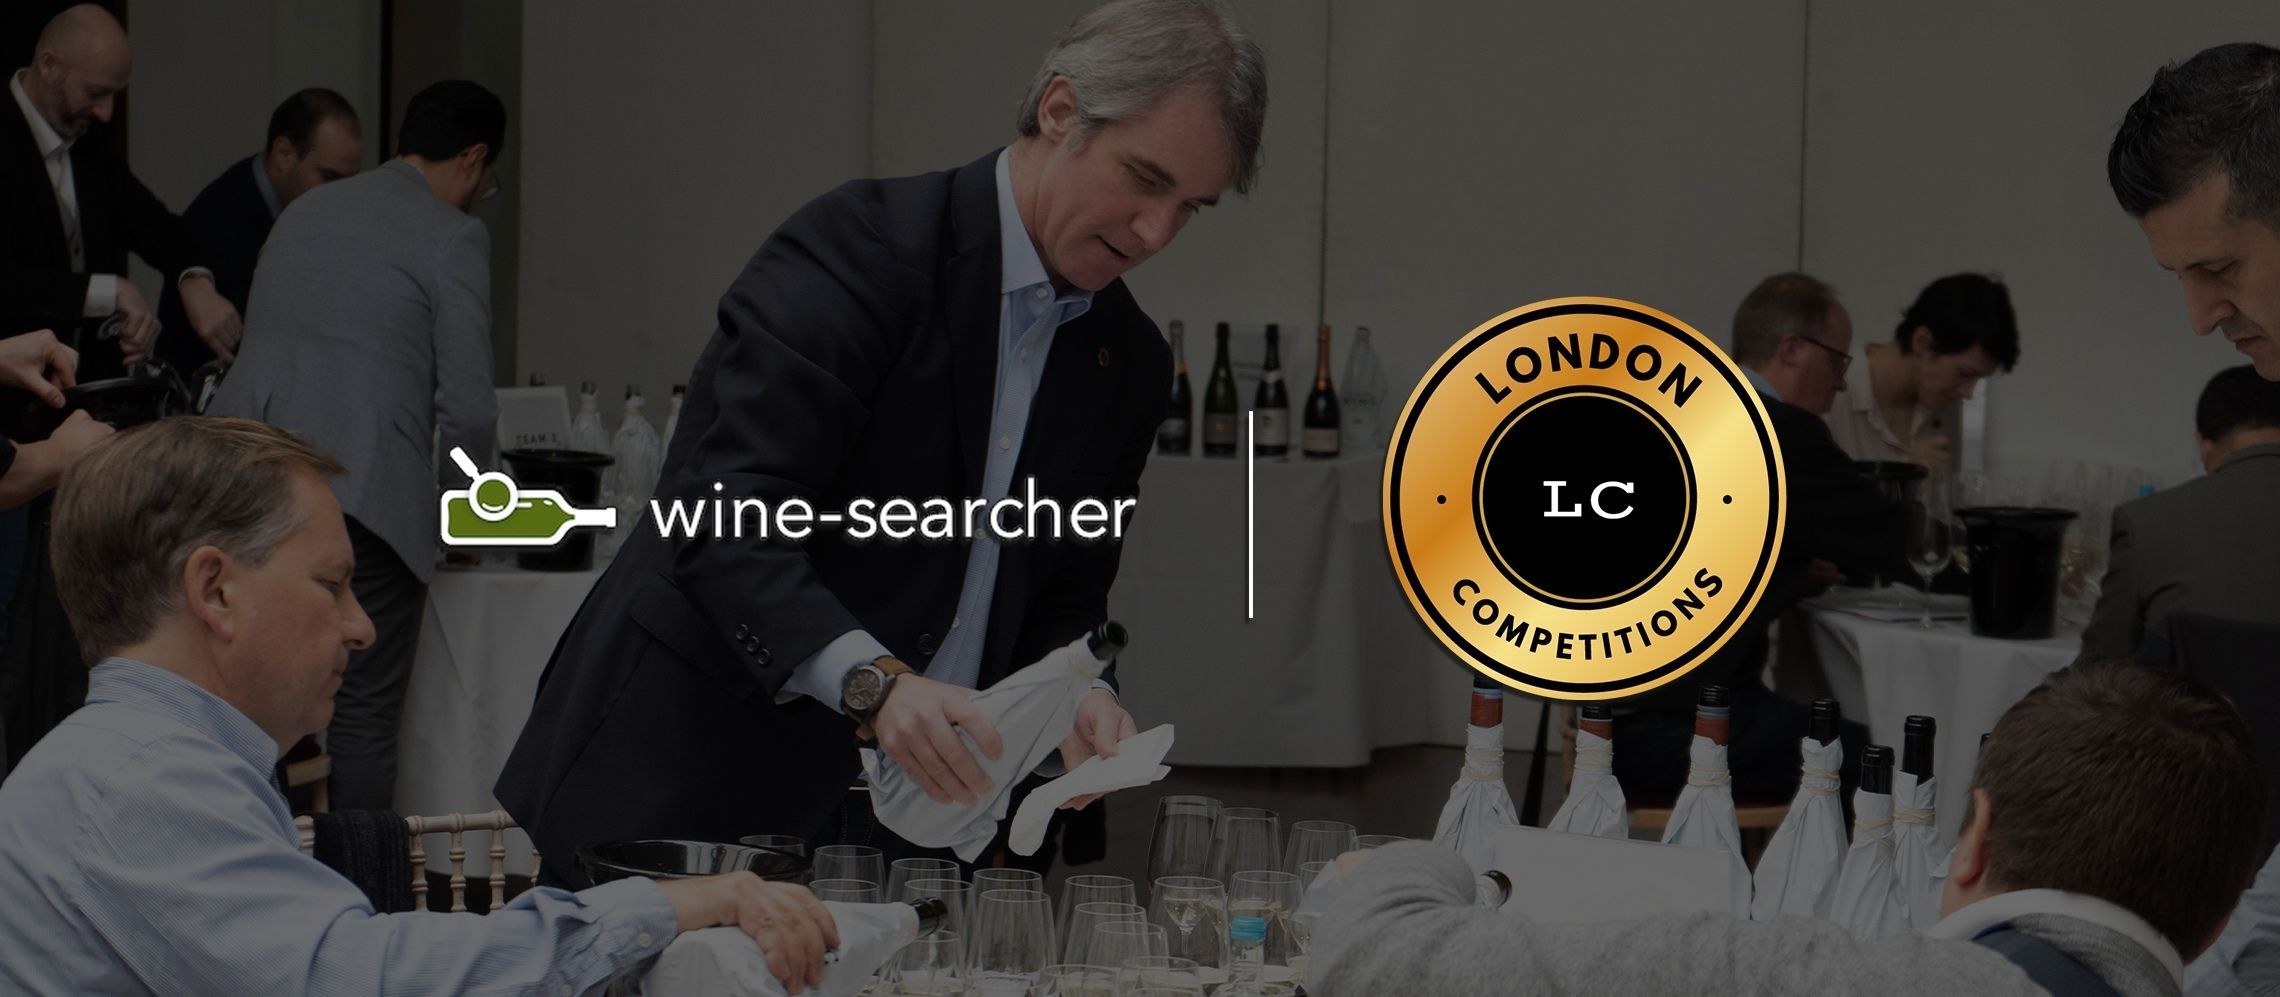 Photo for: London Wine Competition now featured on Wine-Searcher’s Awards and Competition list